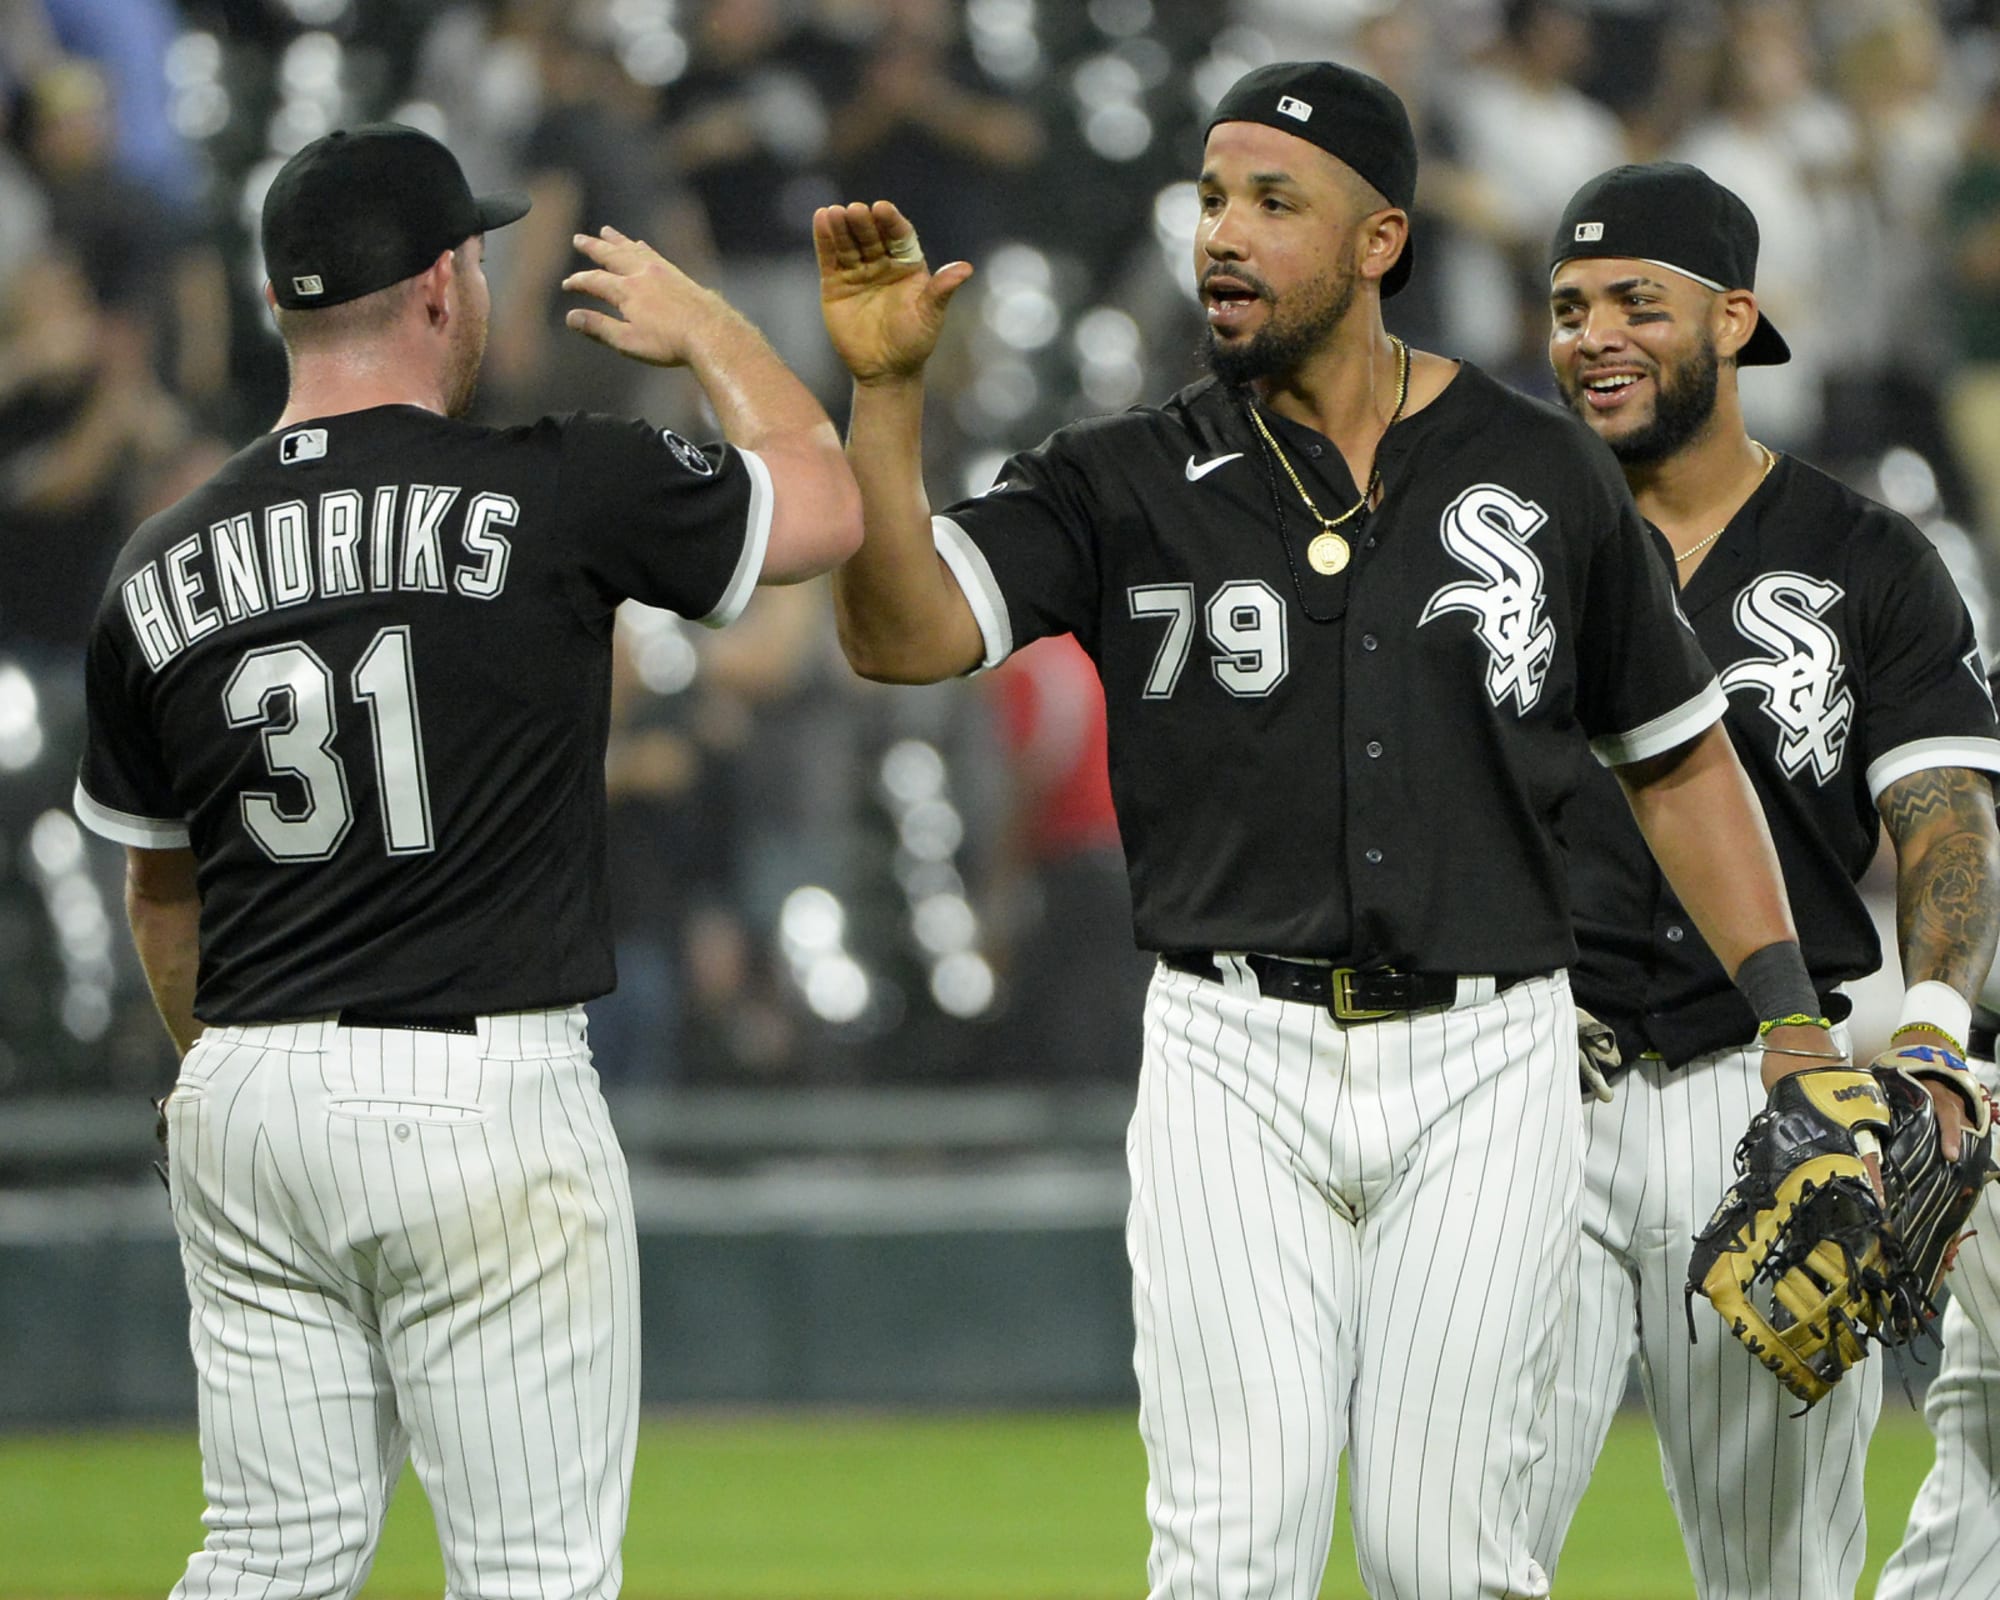 Chicago White Sox Magical night with multiple heroes